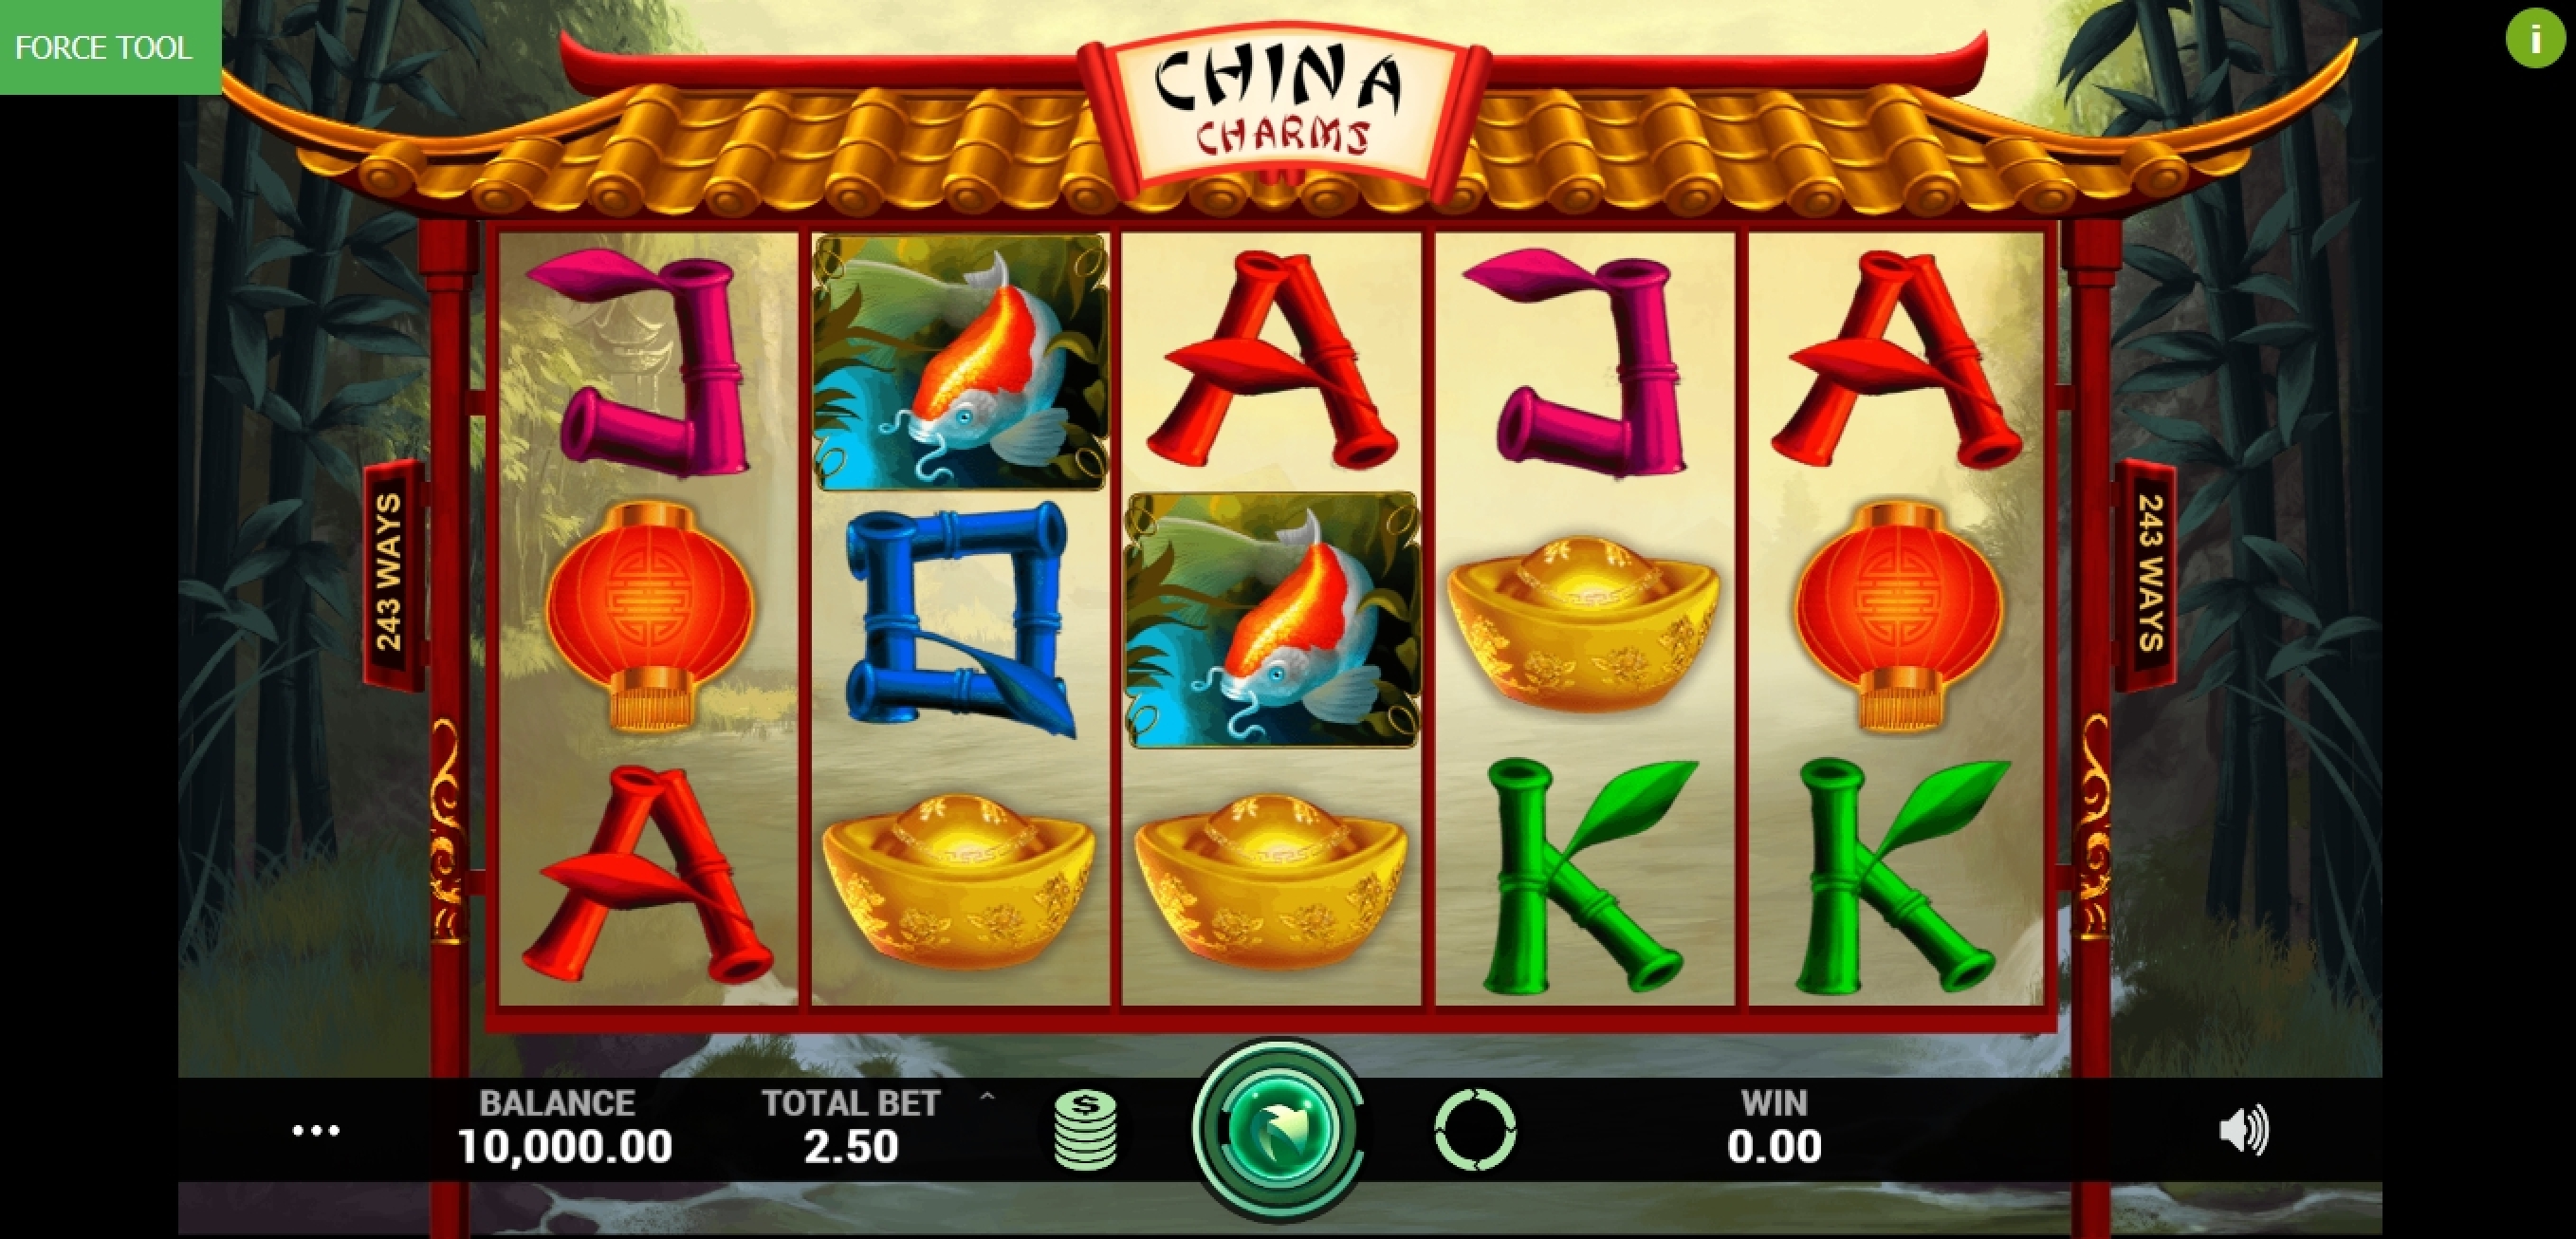 Reels in China Charms Slot Game by Caleta Gaming